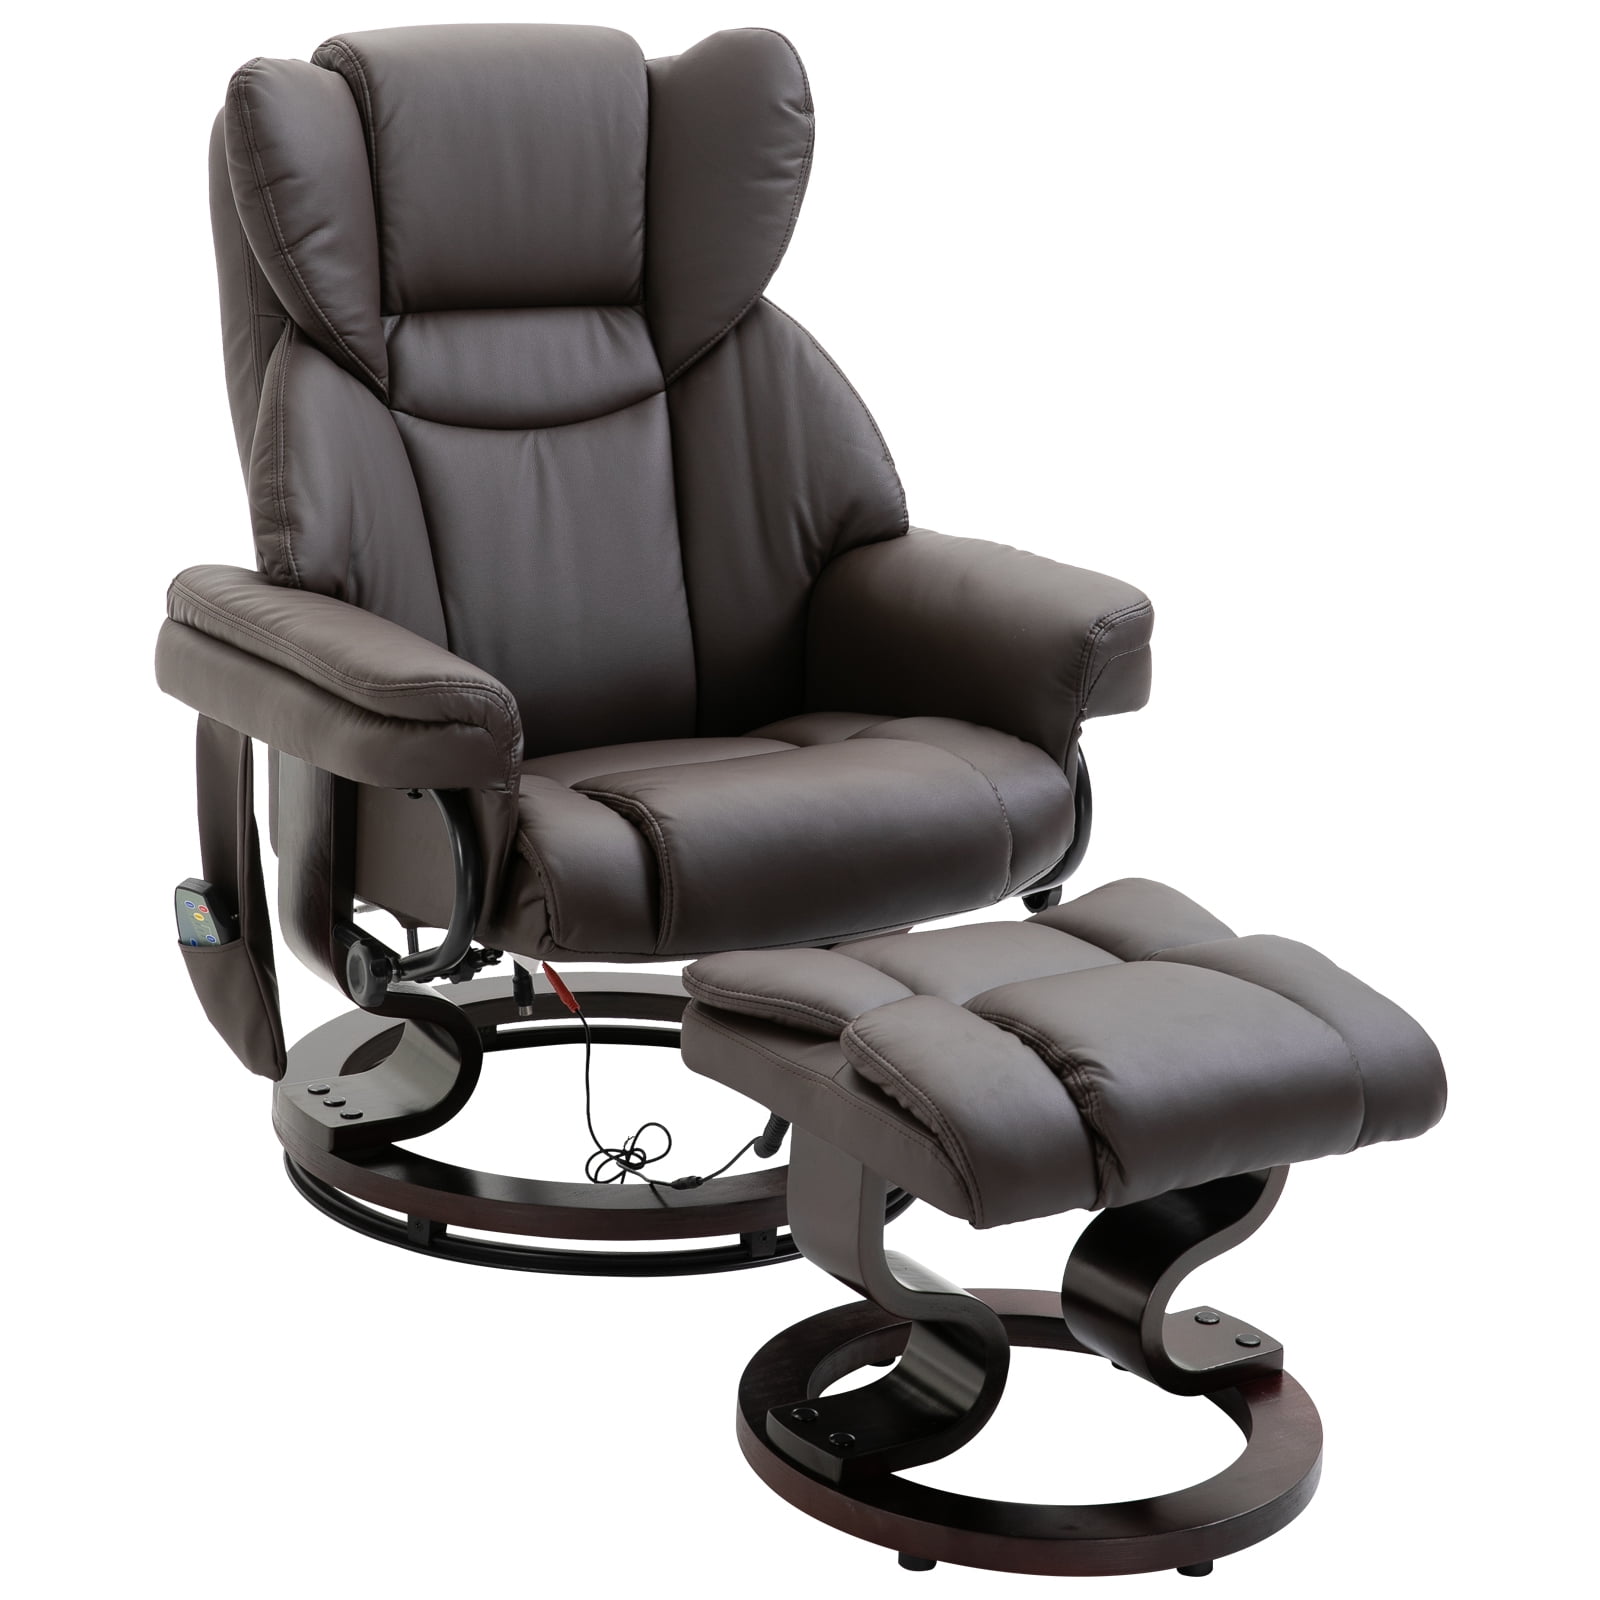 Homcom Massage Recliner Chair With, Leather Recliner Chairs Reviews